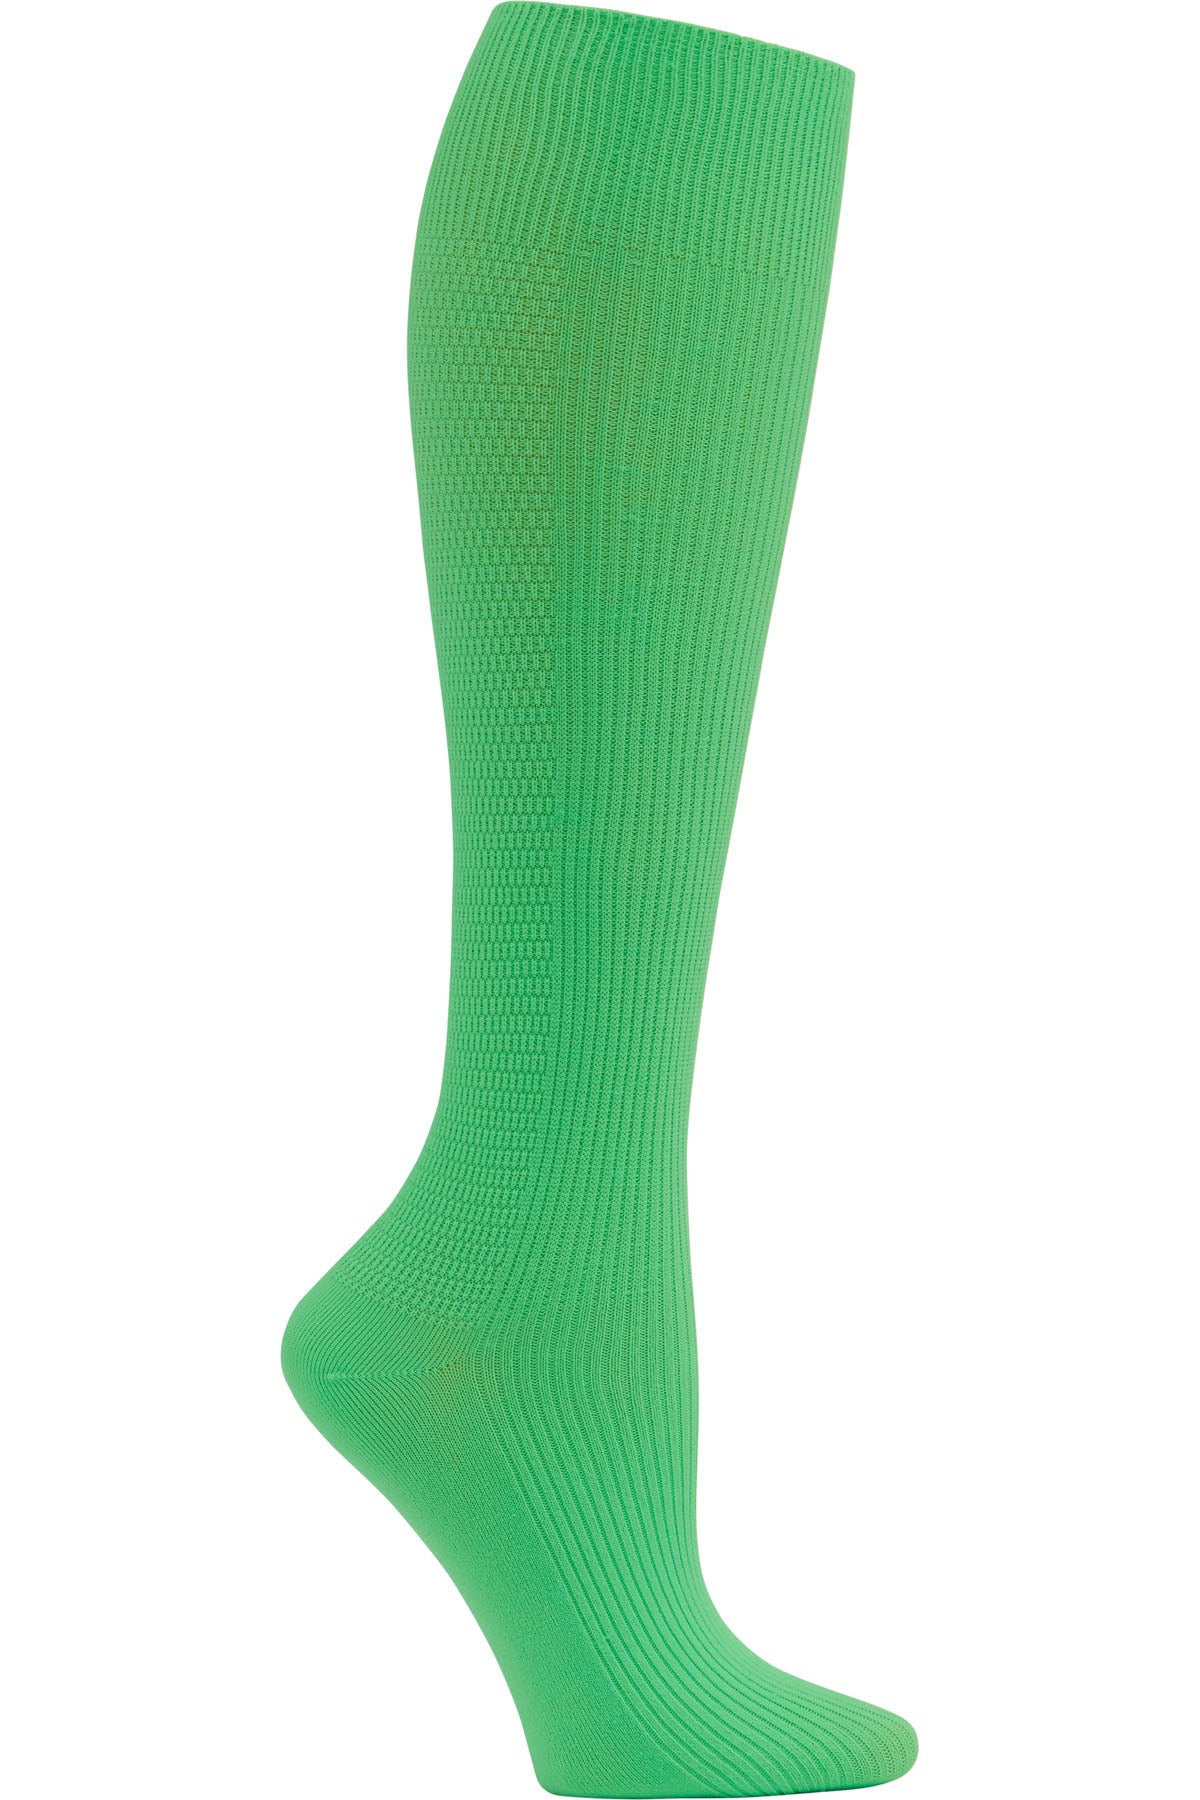 Cherokee Mild Compression Support Socks 8-12 mmHg in Glitzy Green at Parker's Clothing and Shoes.